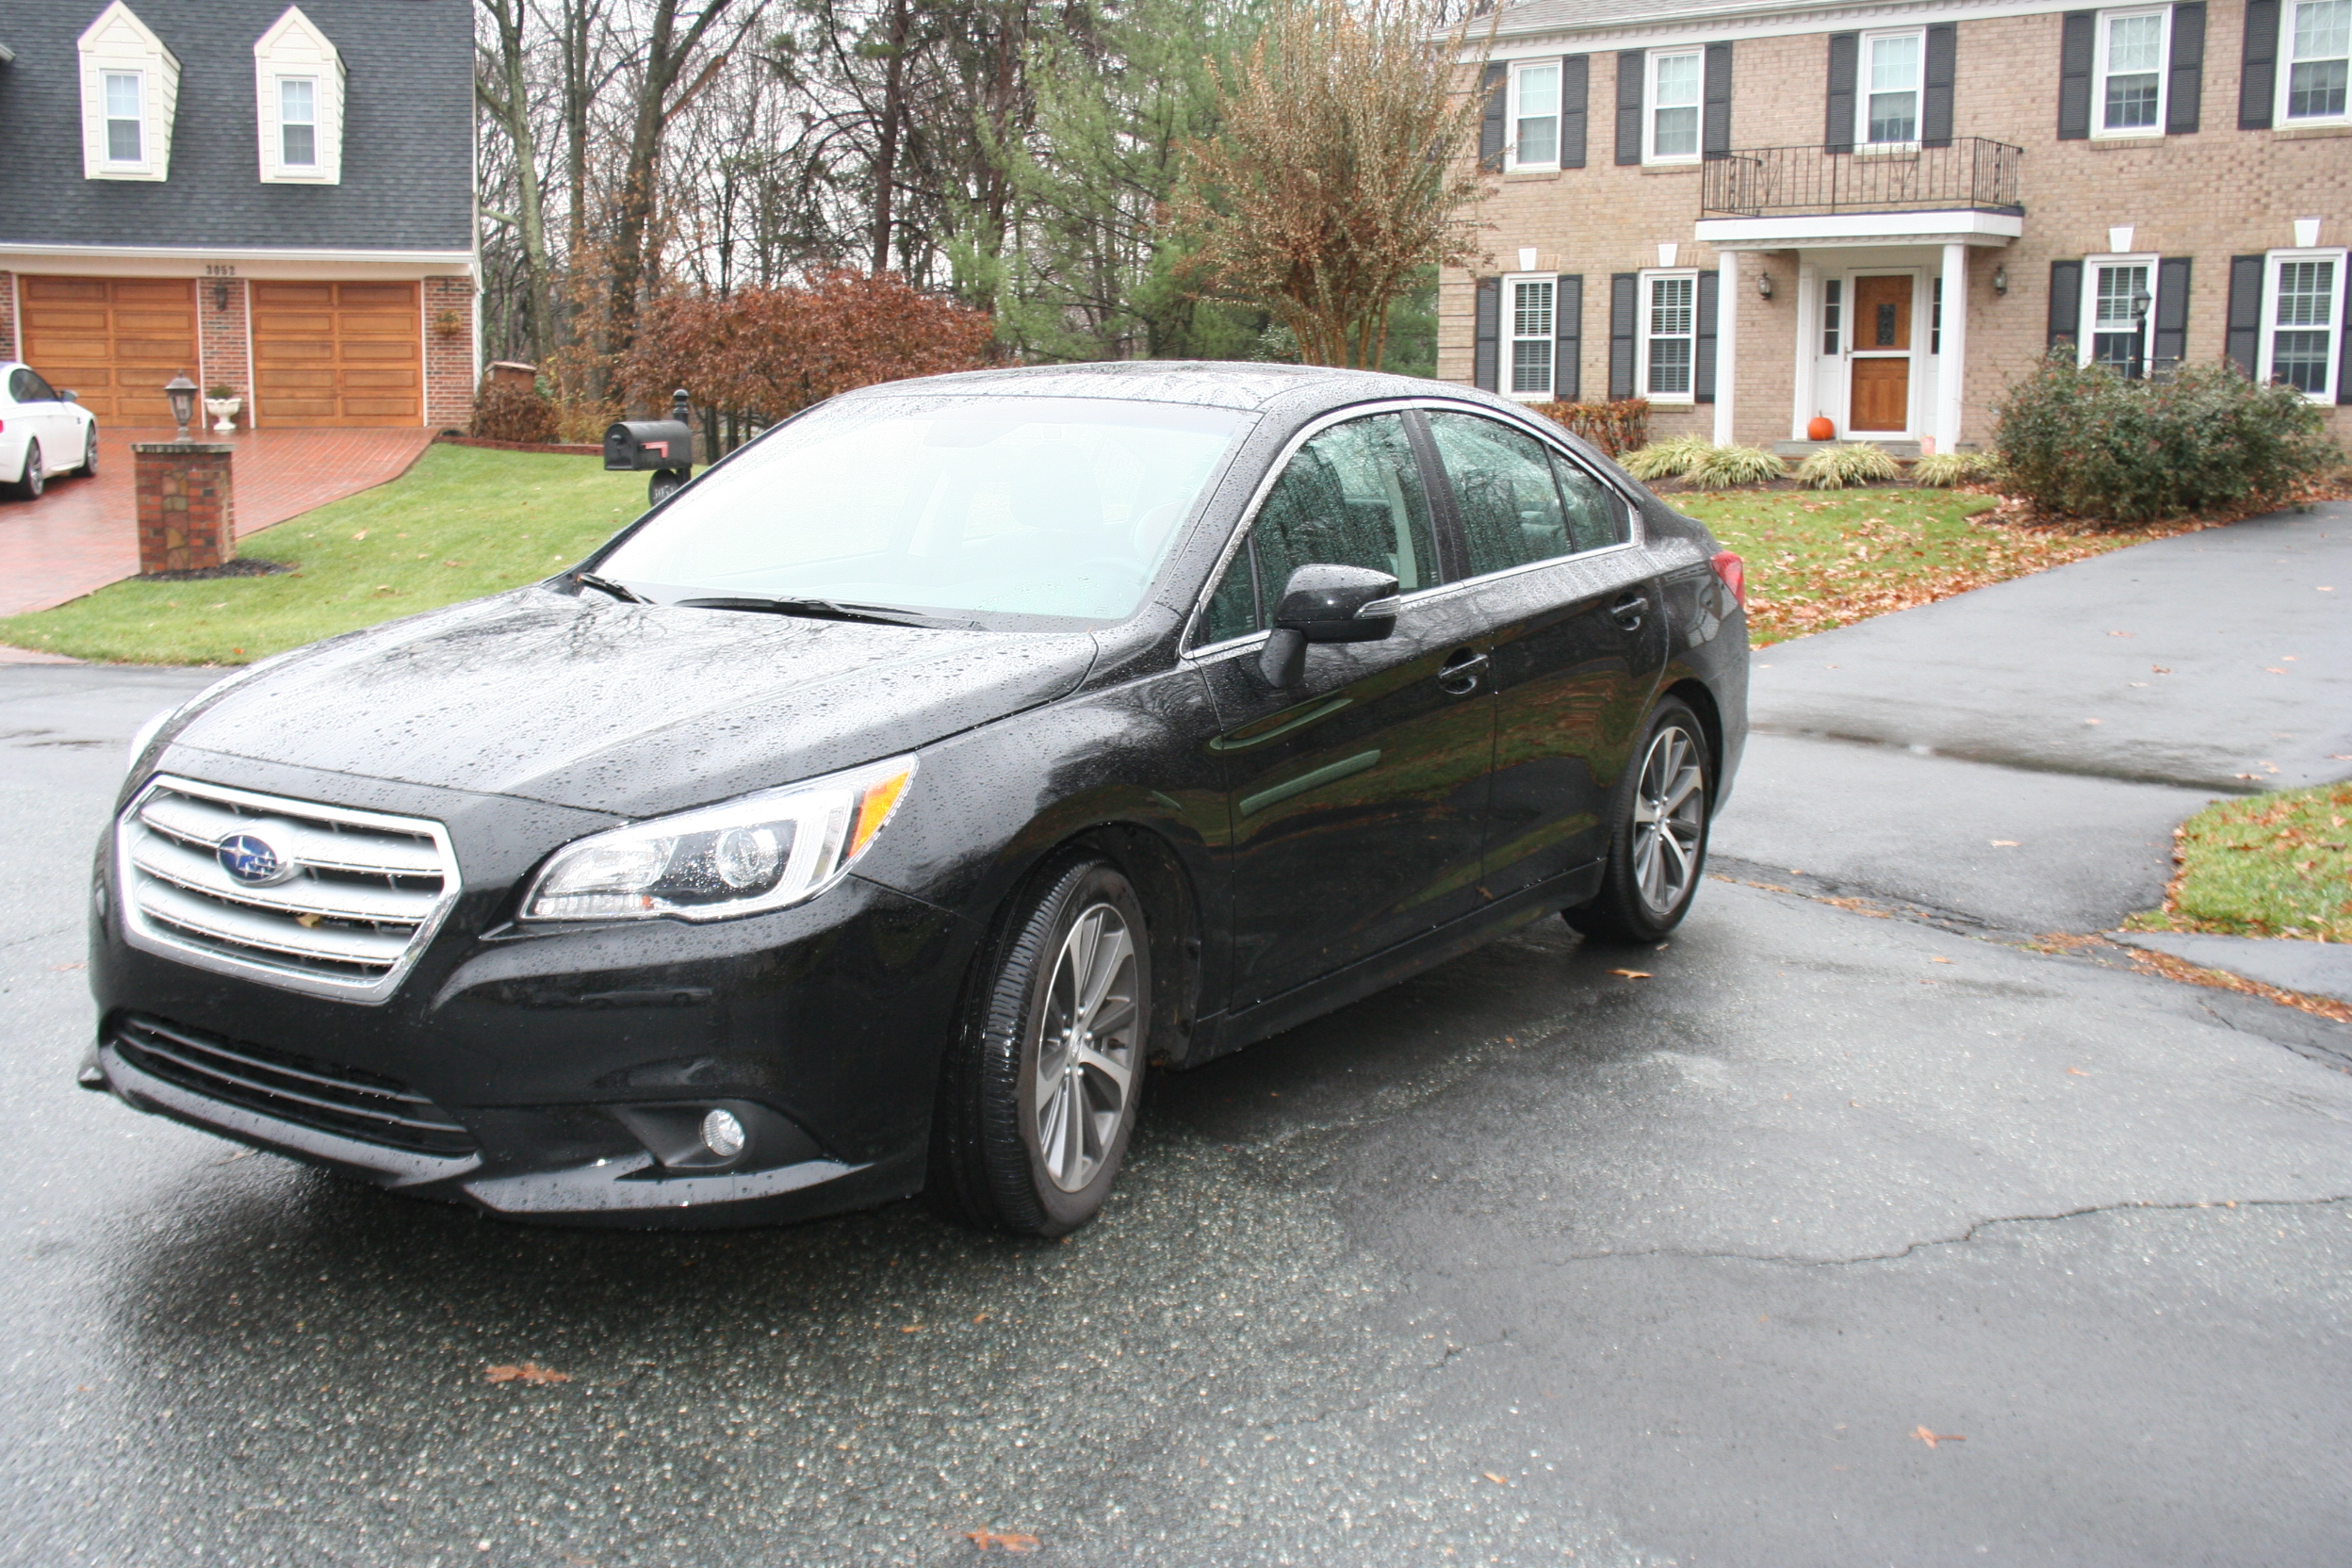 Car Report: The 2015 Subaru Legacy stands out with all-wheel drive